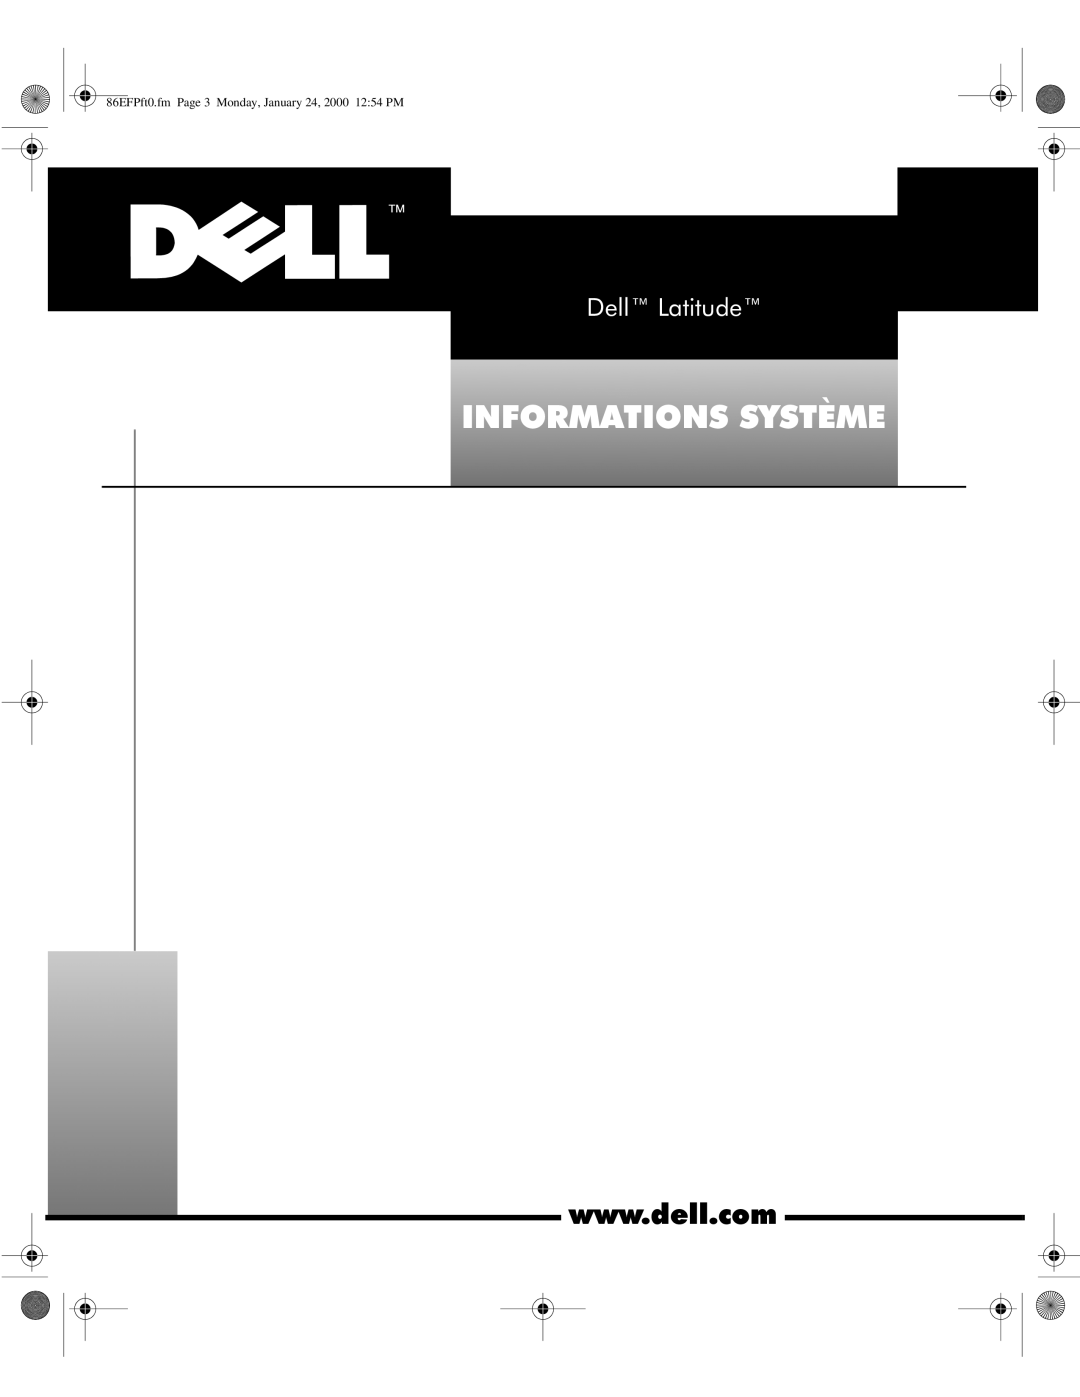 Dell PPX manual 1250$7,216667Ë0, Zzzghoofrp, Hooœ/Dwlwxghœ, 86EFPft0.fm Page 3 Monday, January 24, 2000 1254 PM 